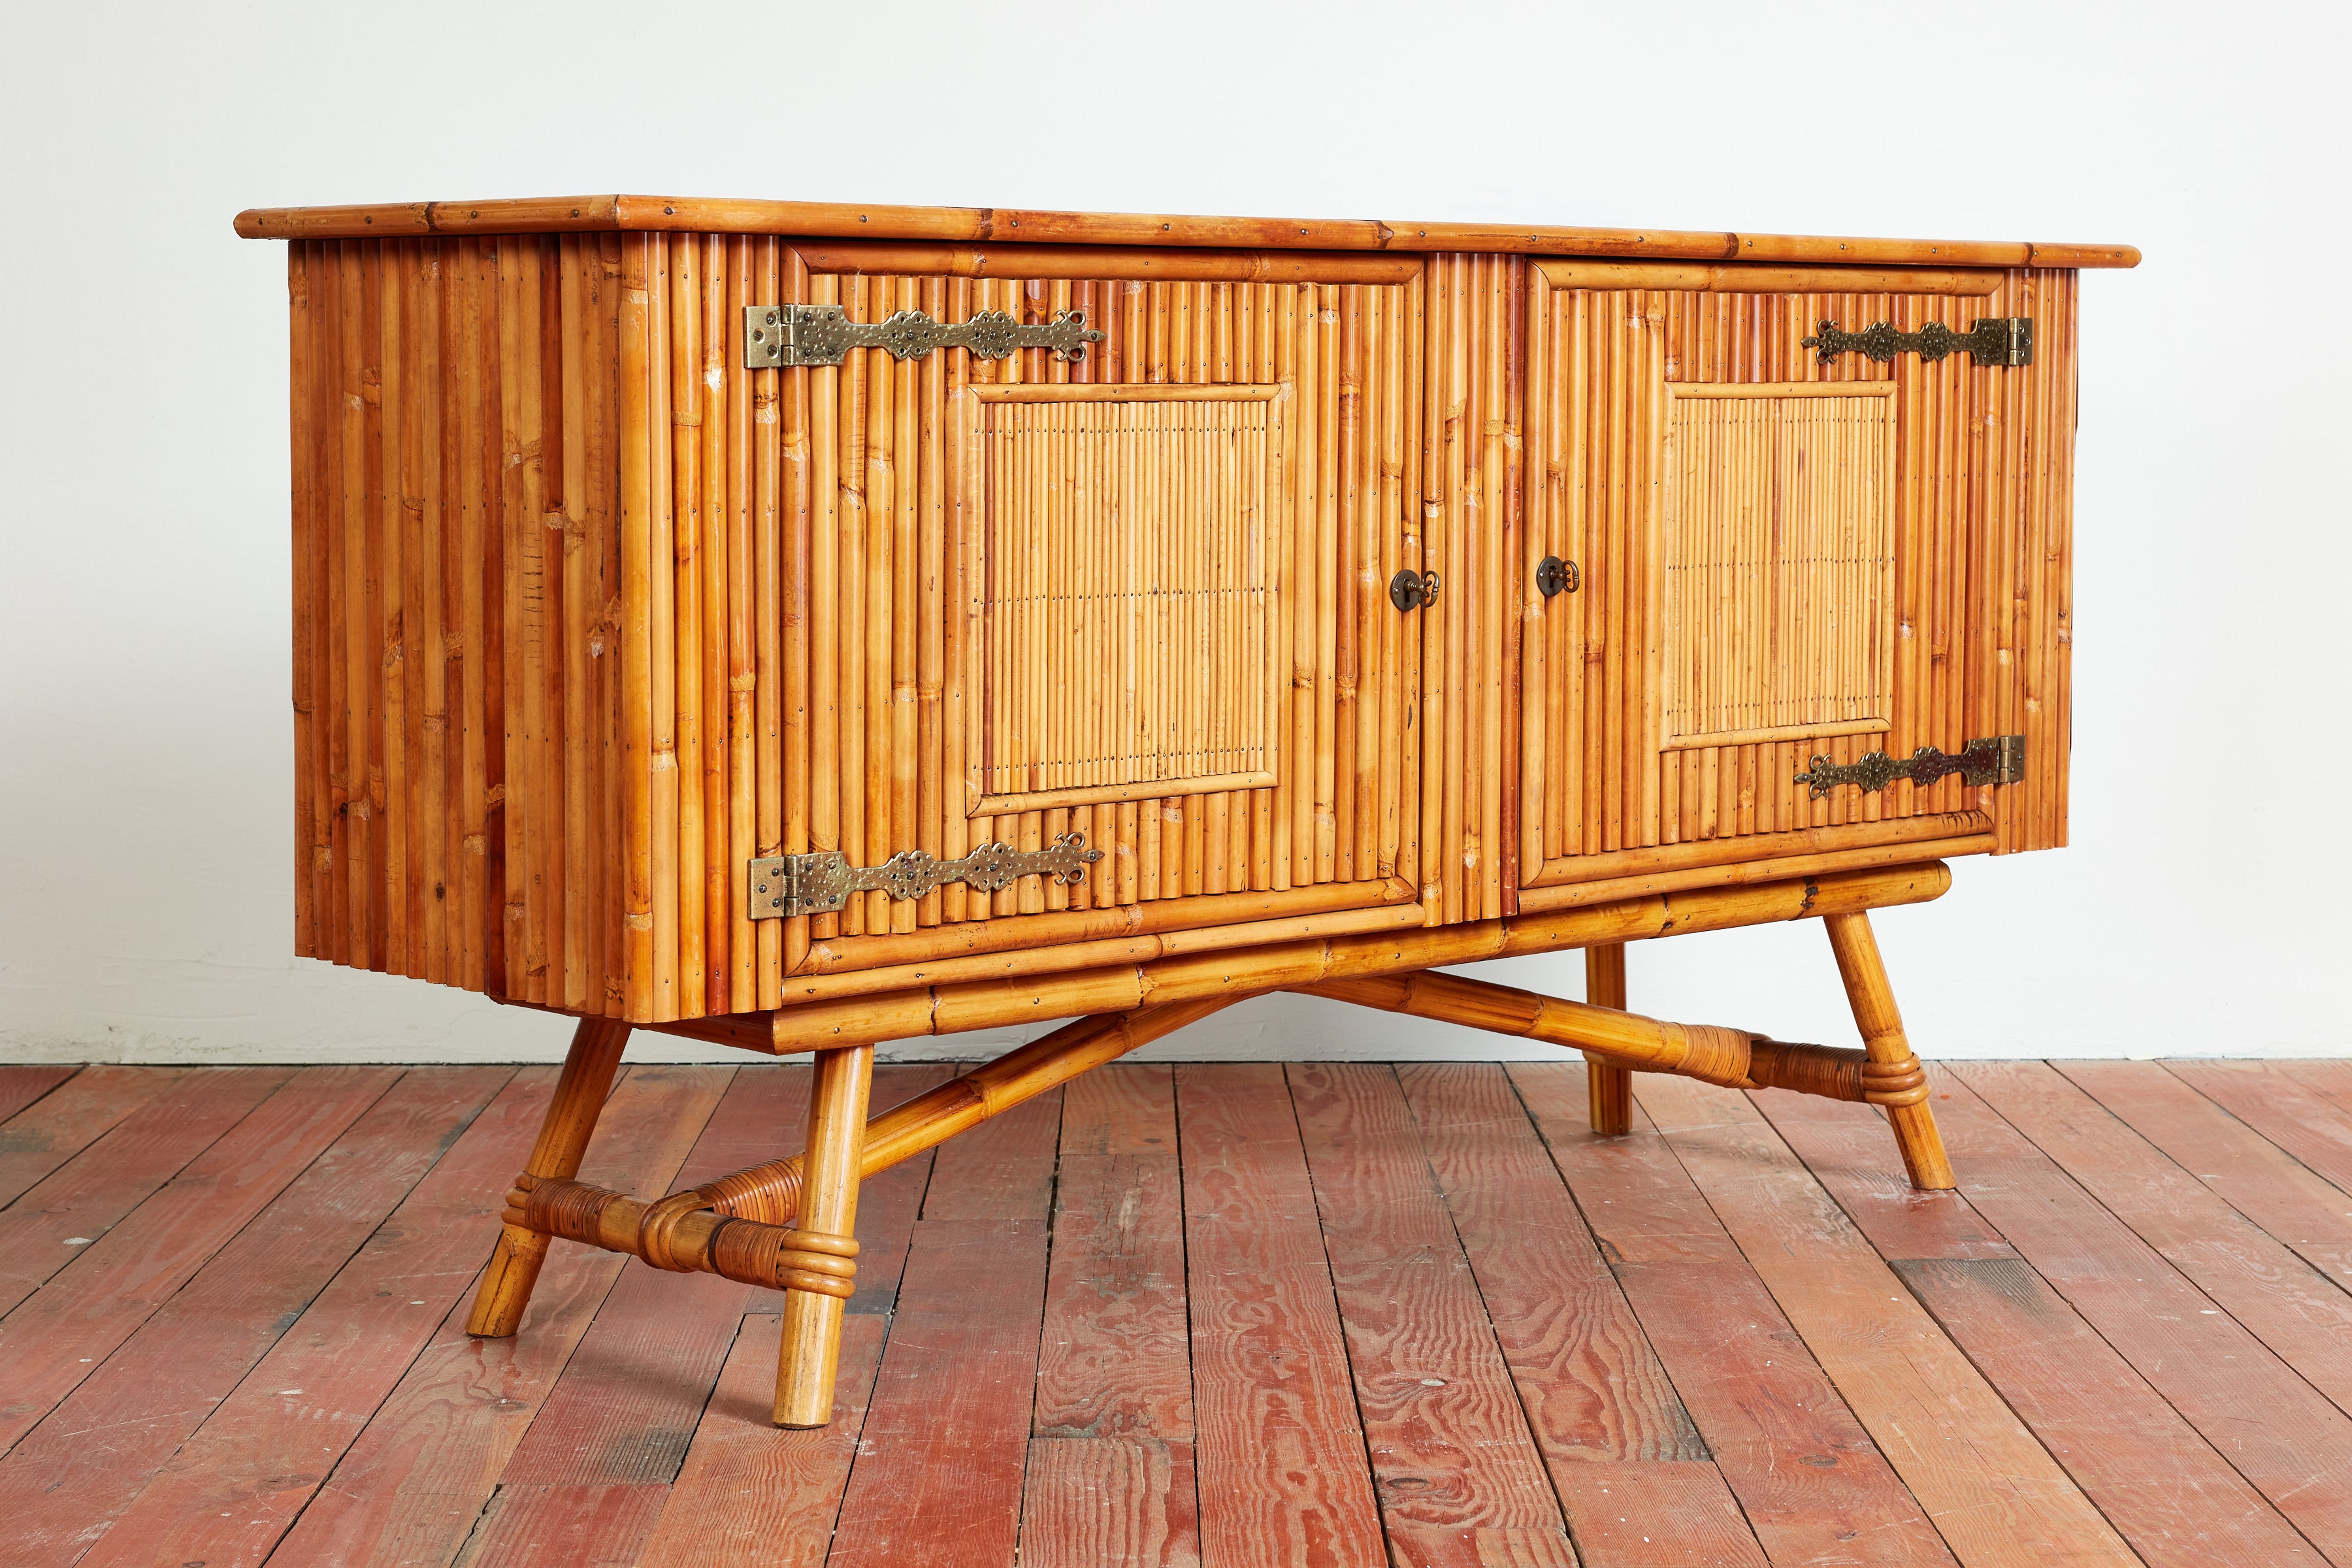 Audoux Minet Sideboard For Sale